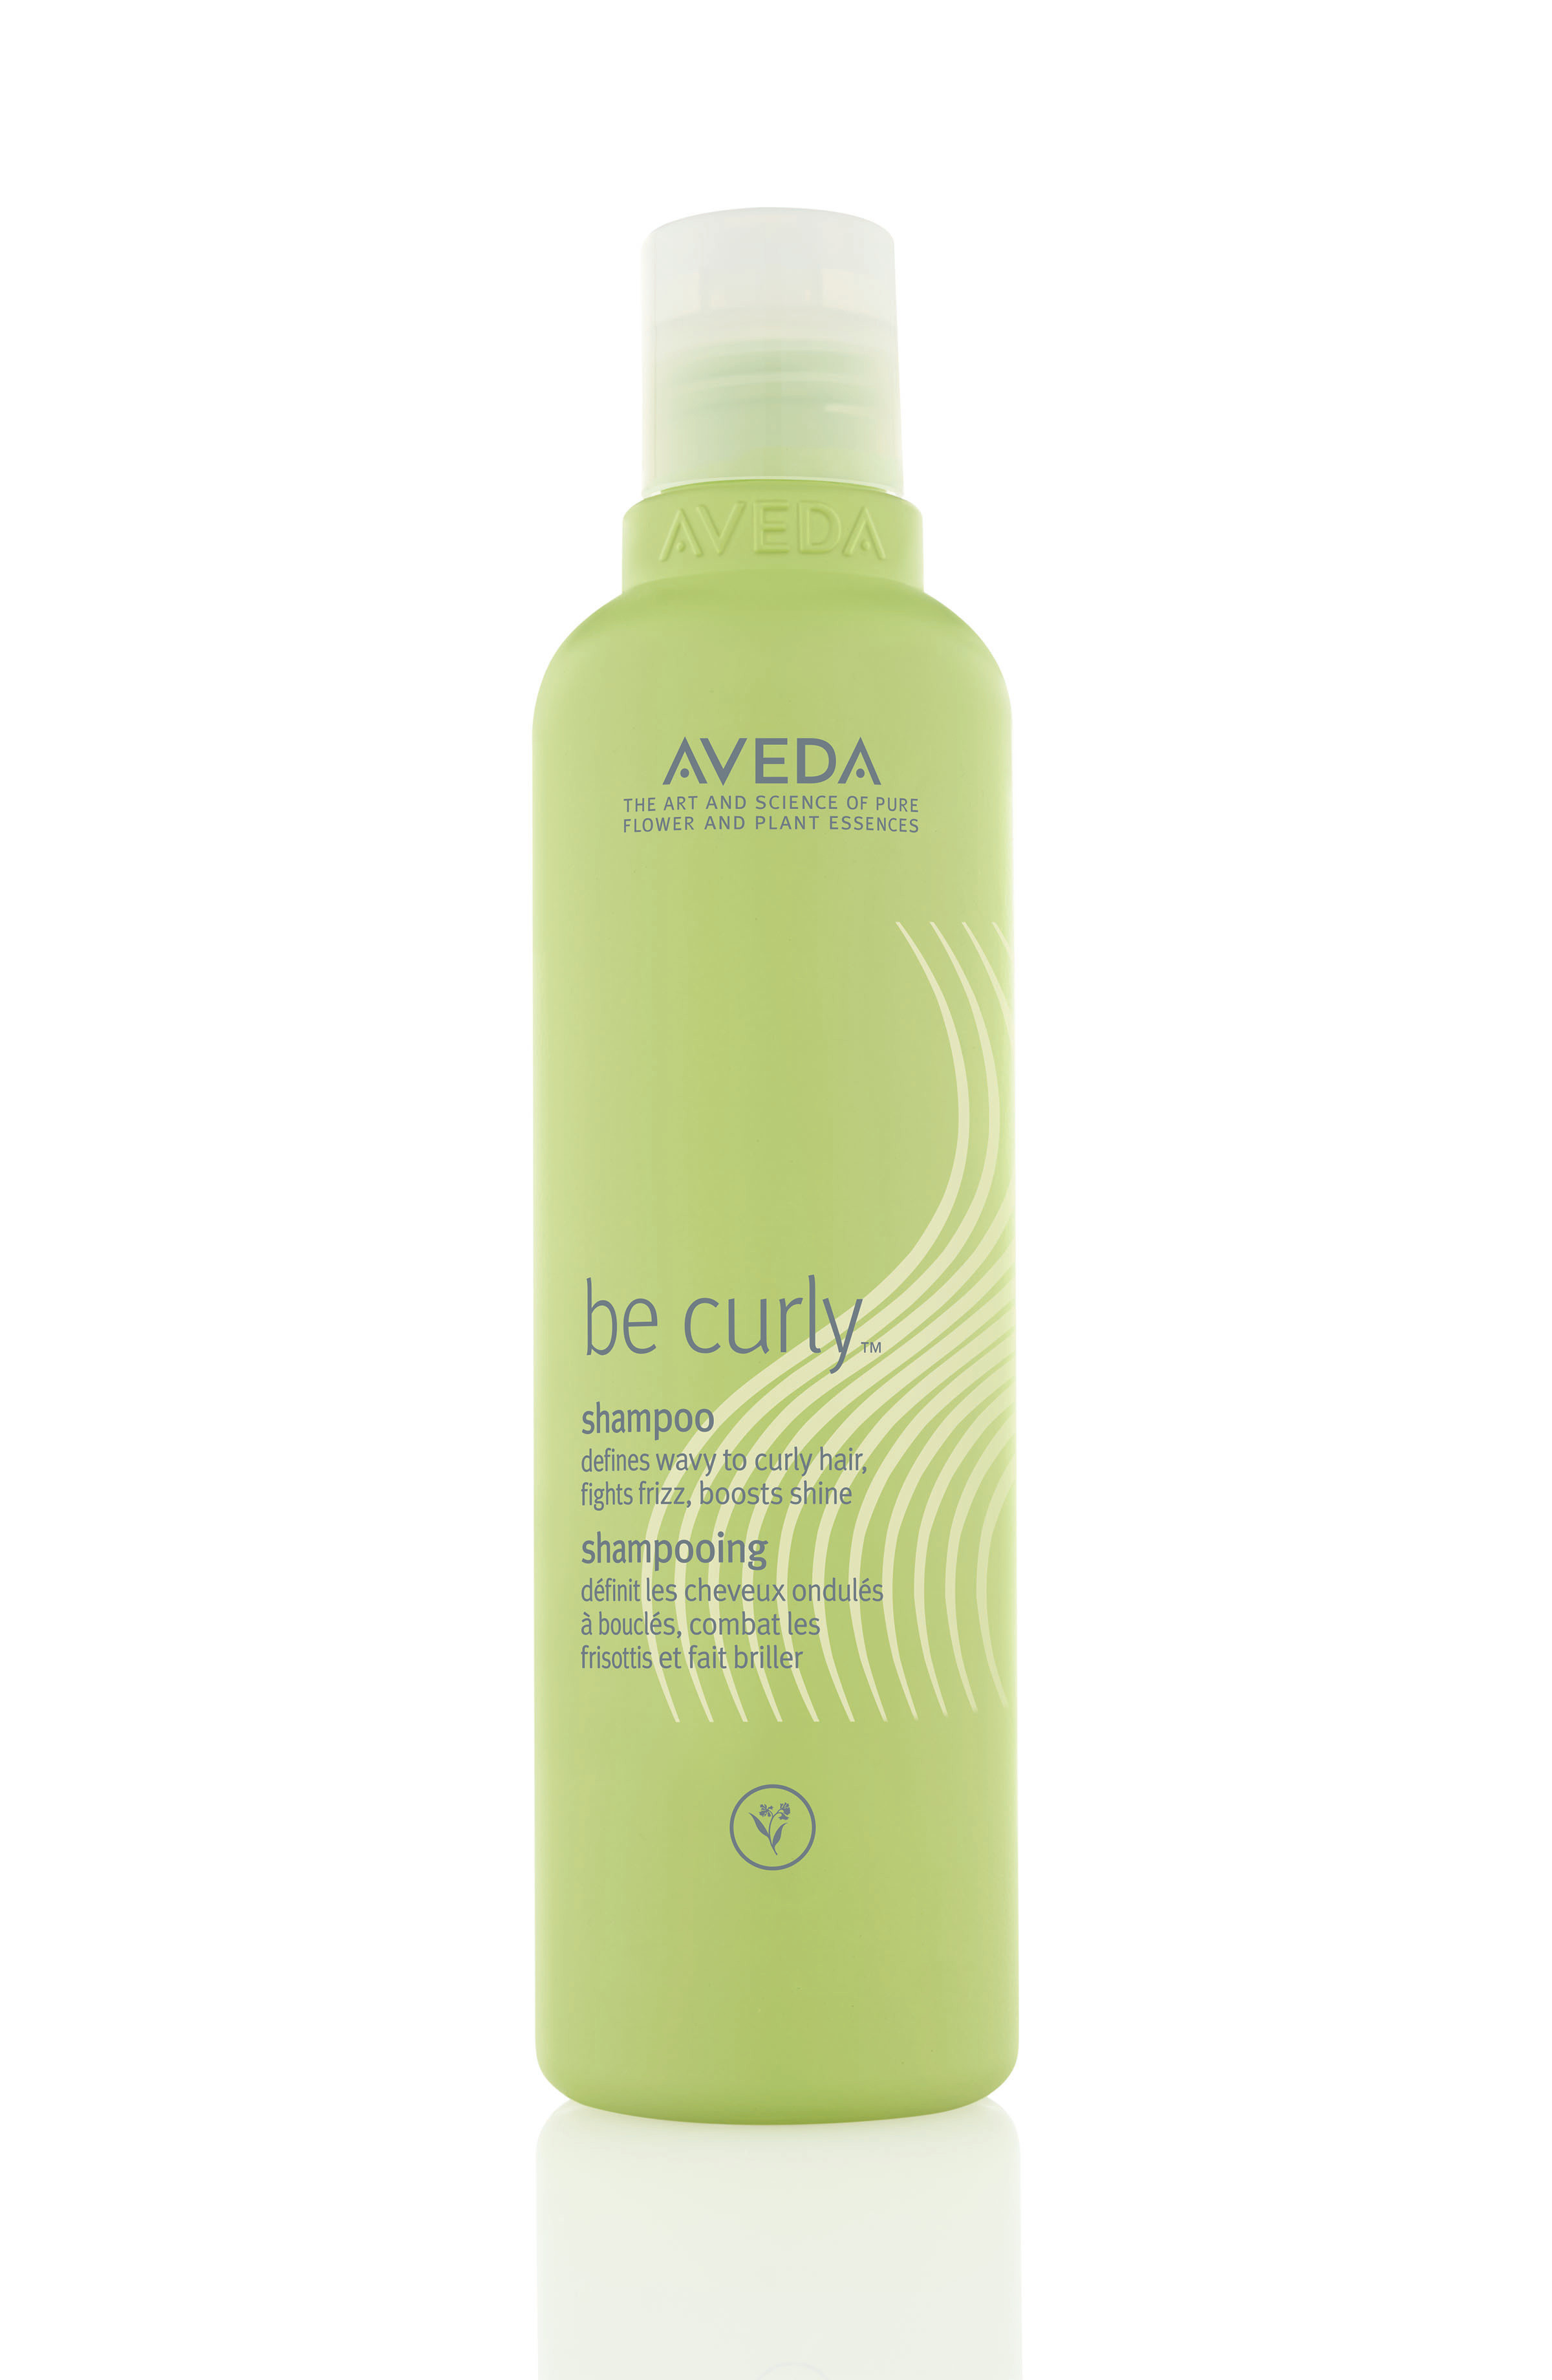 Aveda be curly shampoo 250 ml, Green, large image number 0